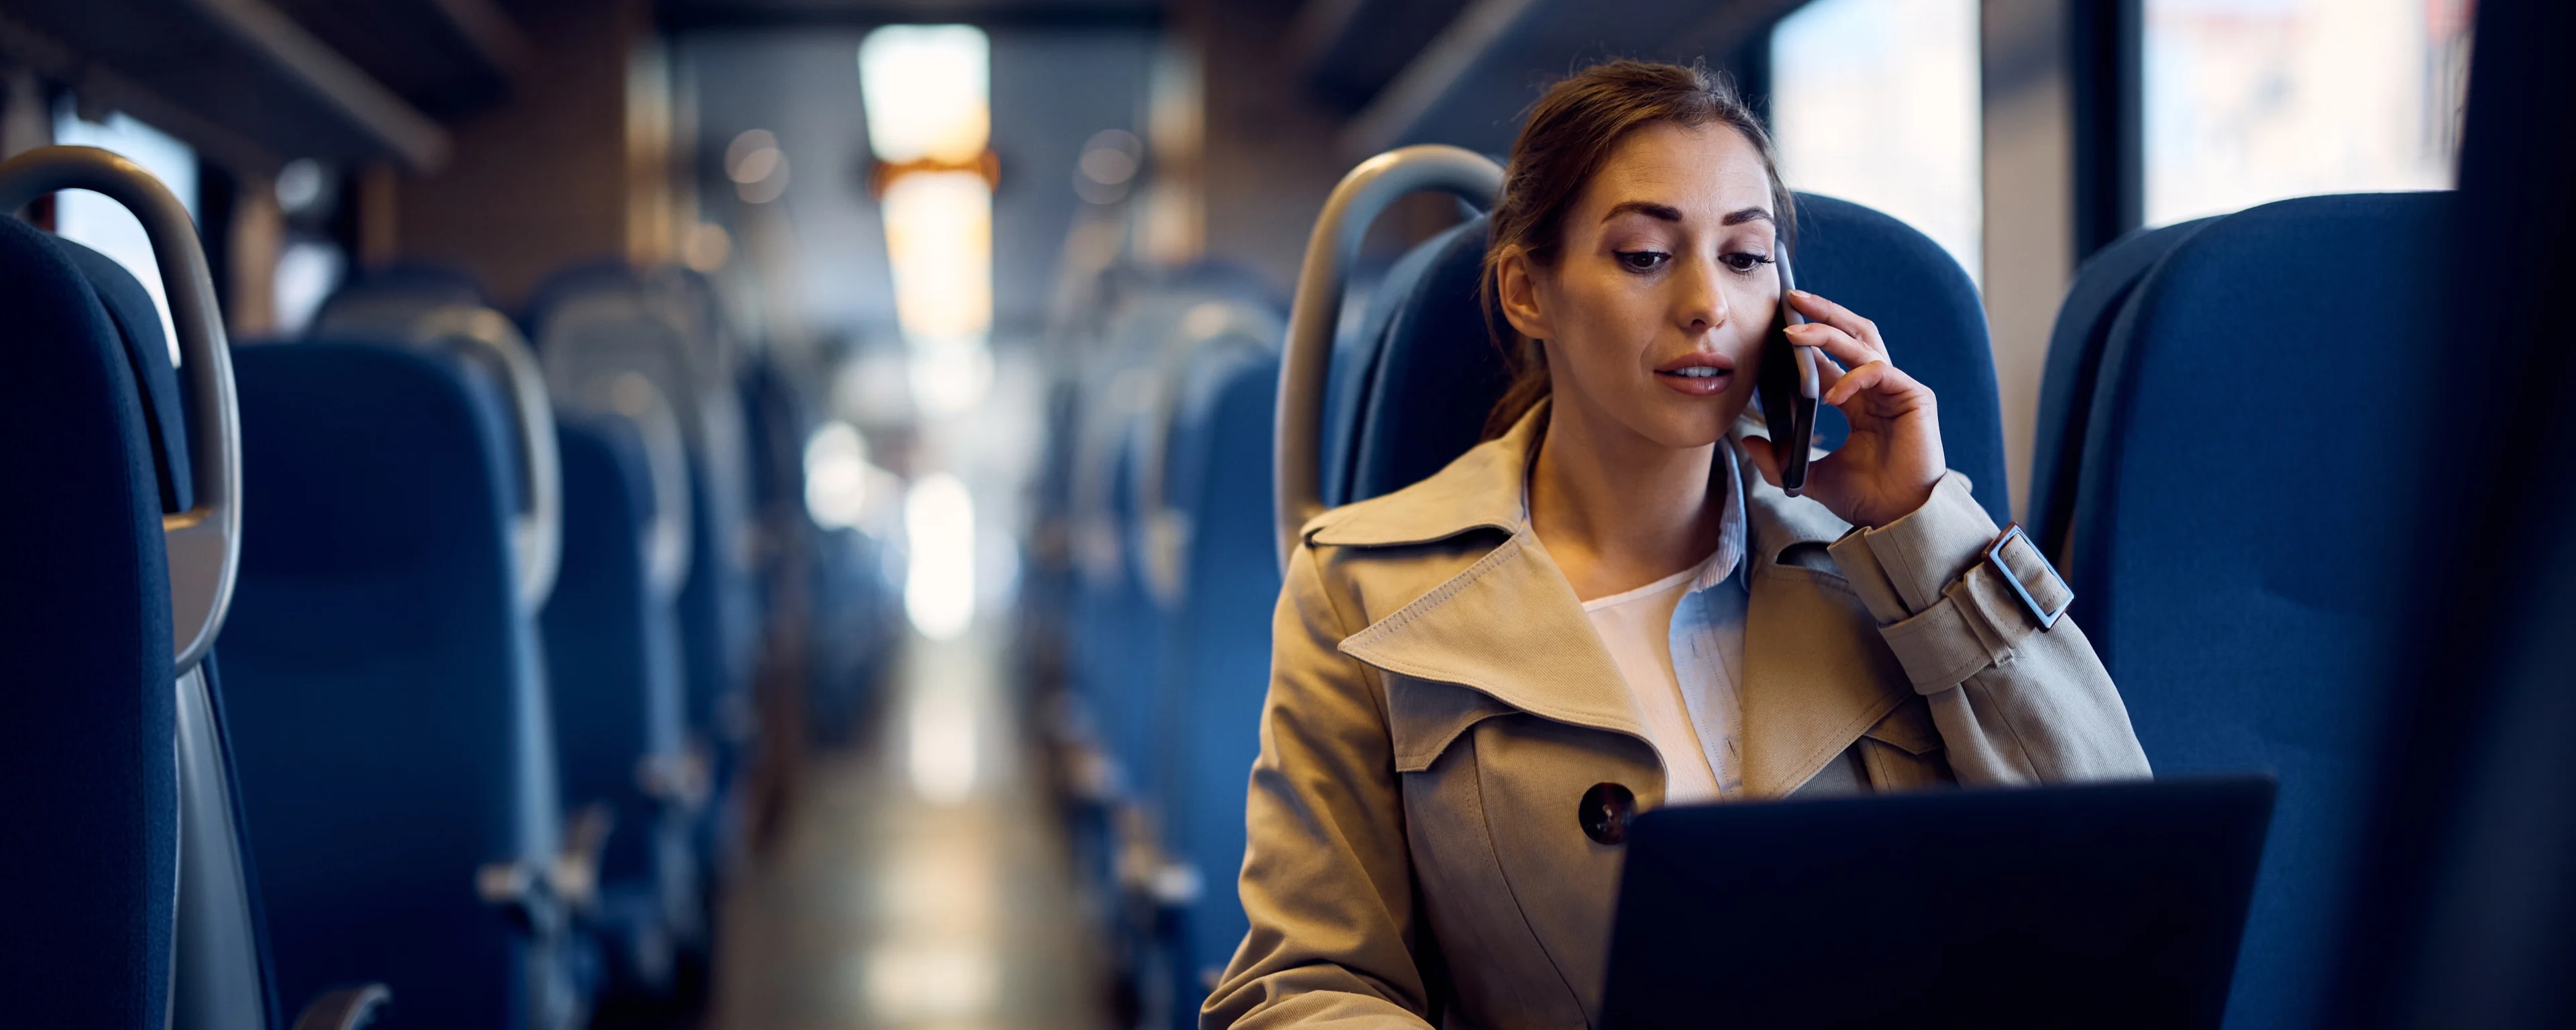 A young woman talking on a phone and working on a laptop on the train